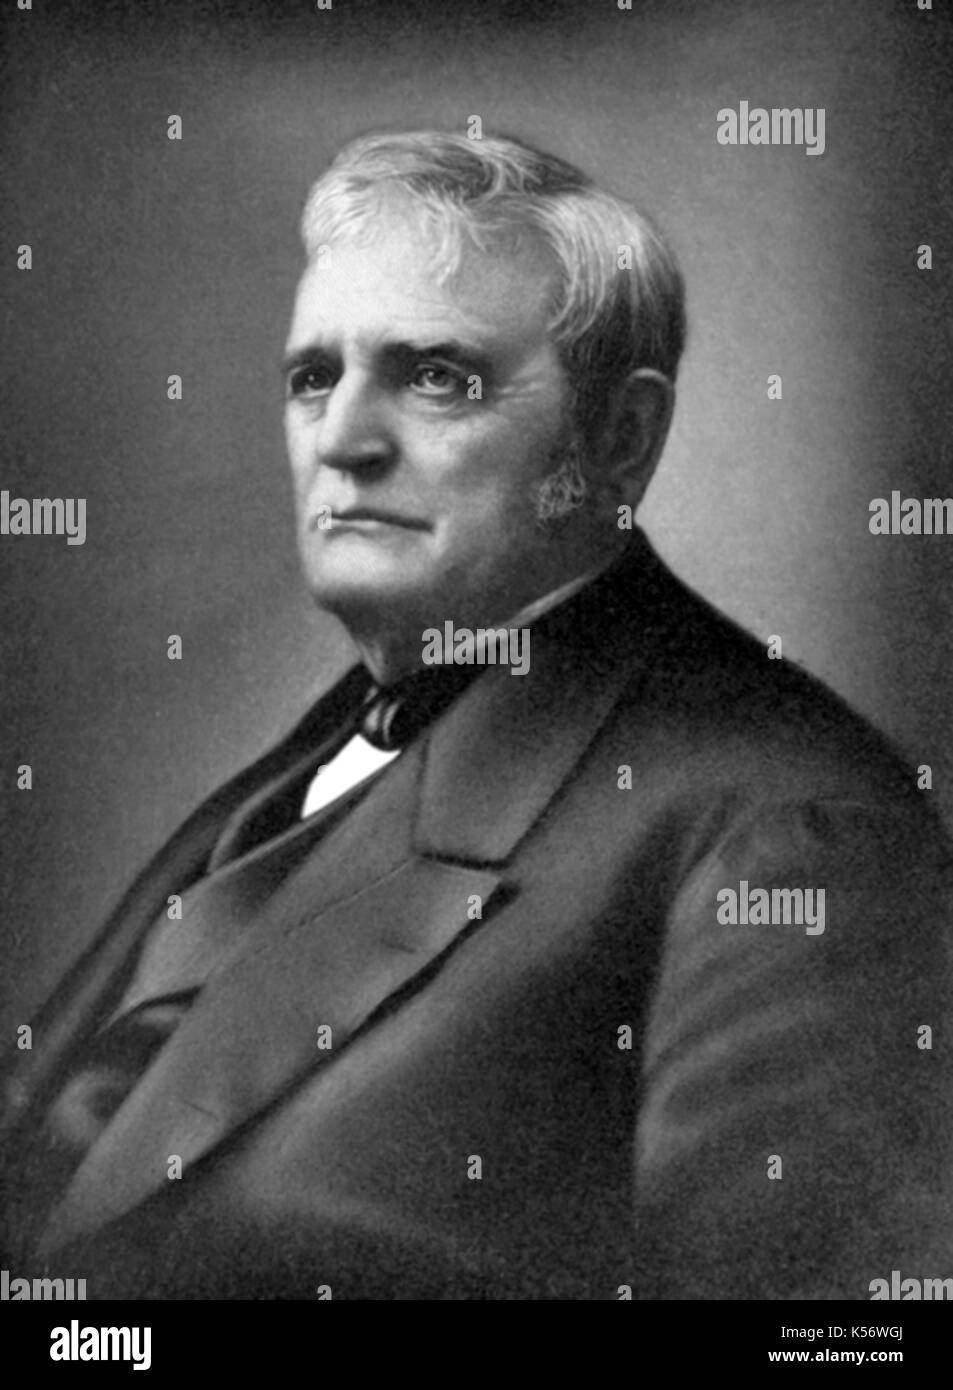 John Deere (February 7, 1804 – May 17, 1886) American blacksmith and manufacturer who founded Deere & Company and invented the first commercially successful steel plow in 1837. Stock Photo